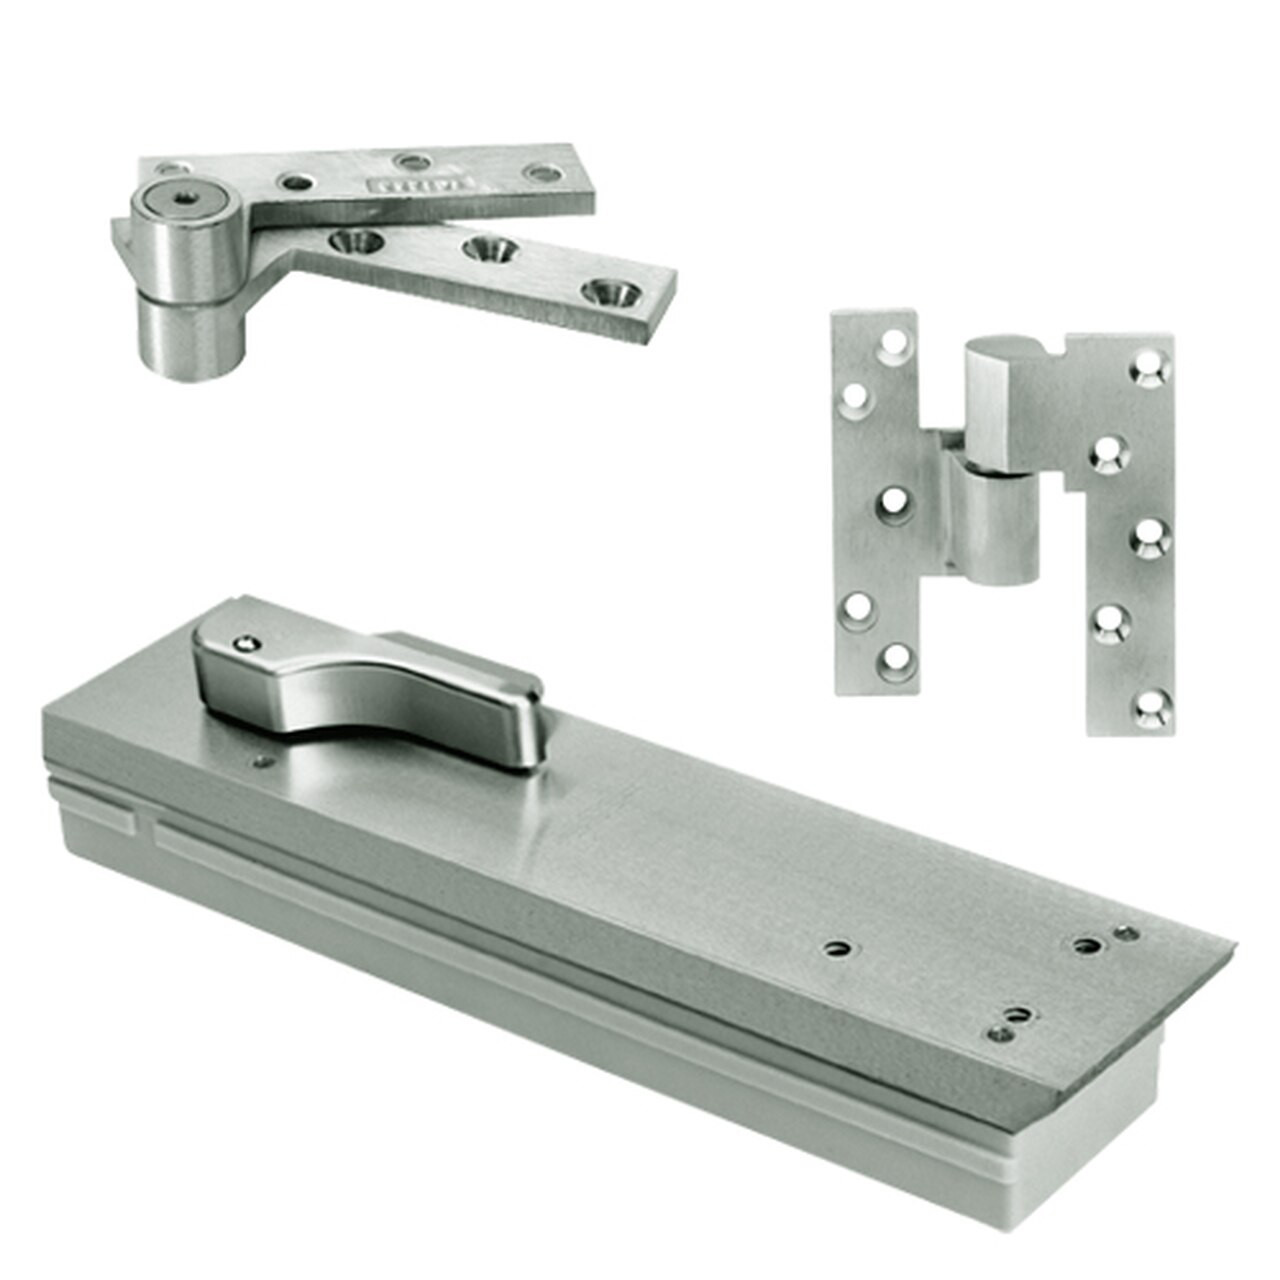 FQ5103NBC-LFP-LTP-LH-619 Rixson Q51 Series Fire Rated 3/4" Offset Hung Shallow Depth Floor Closers in Satin Nickel Finish